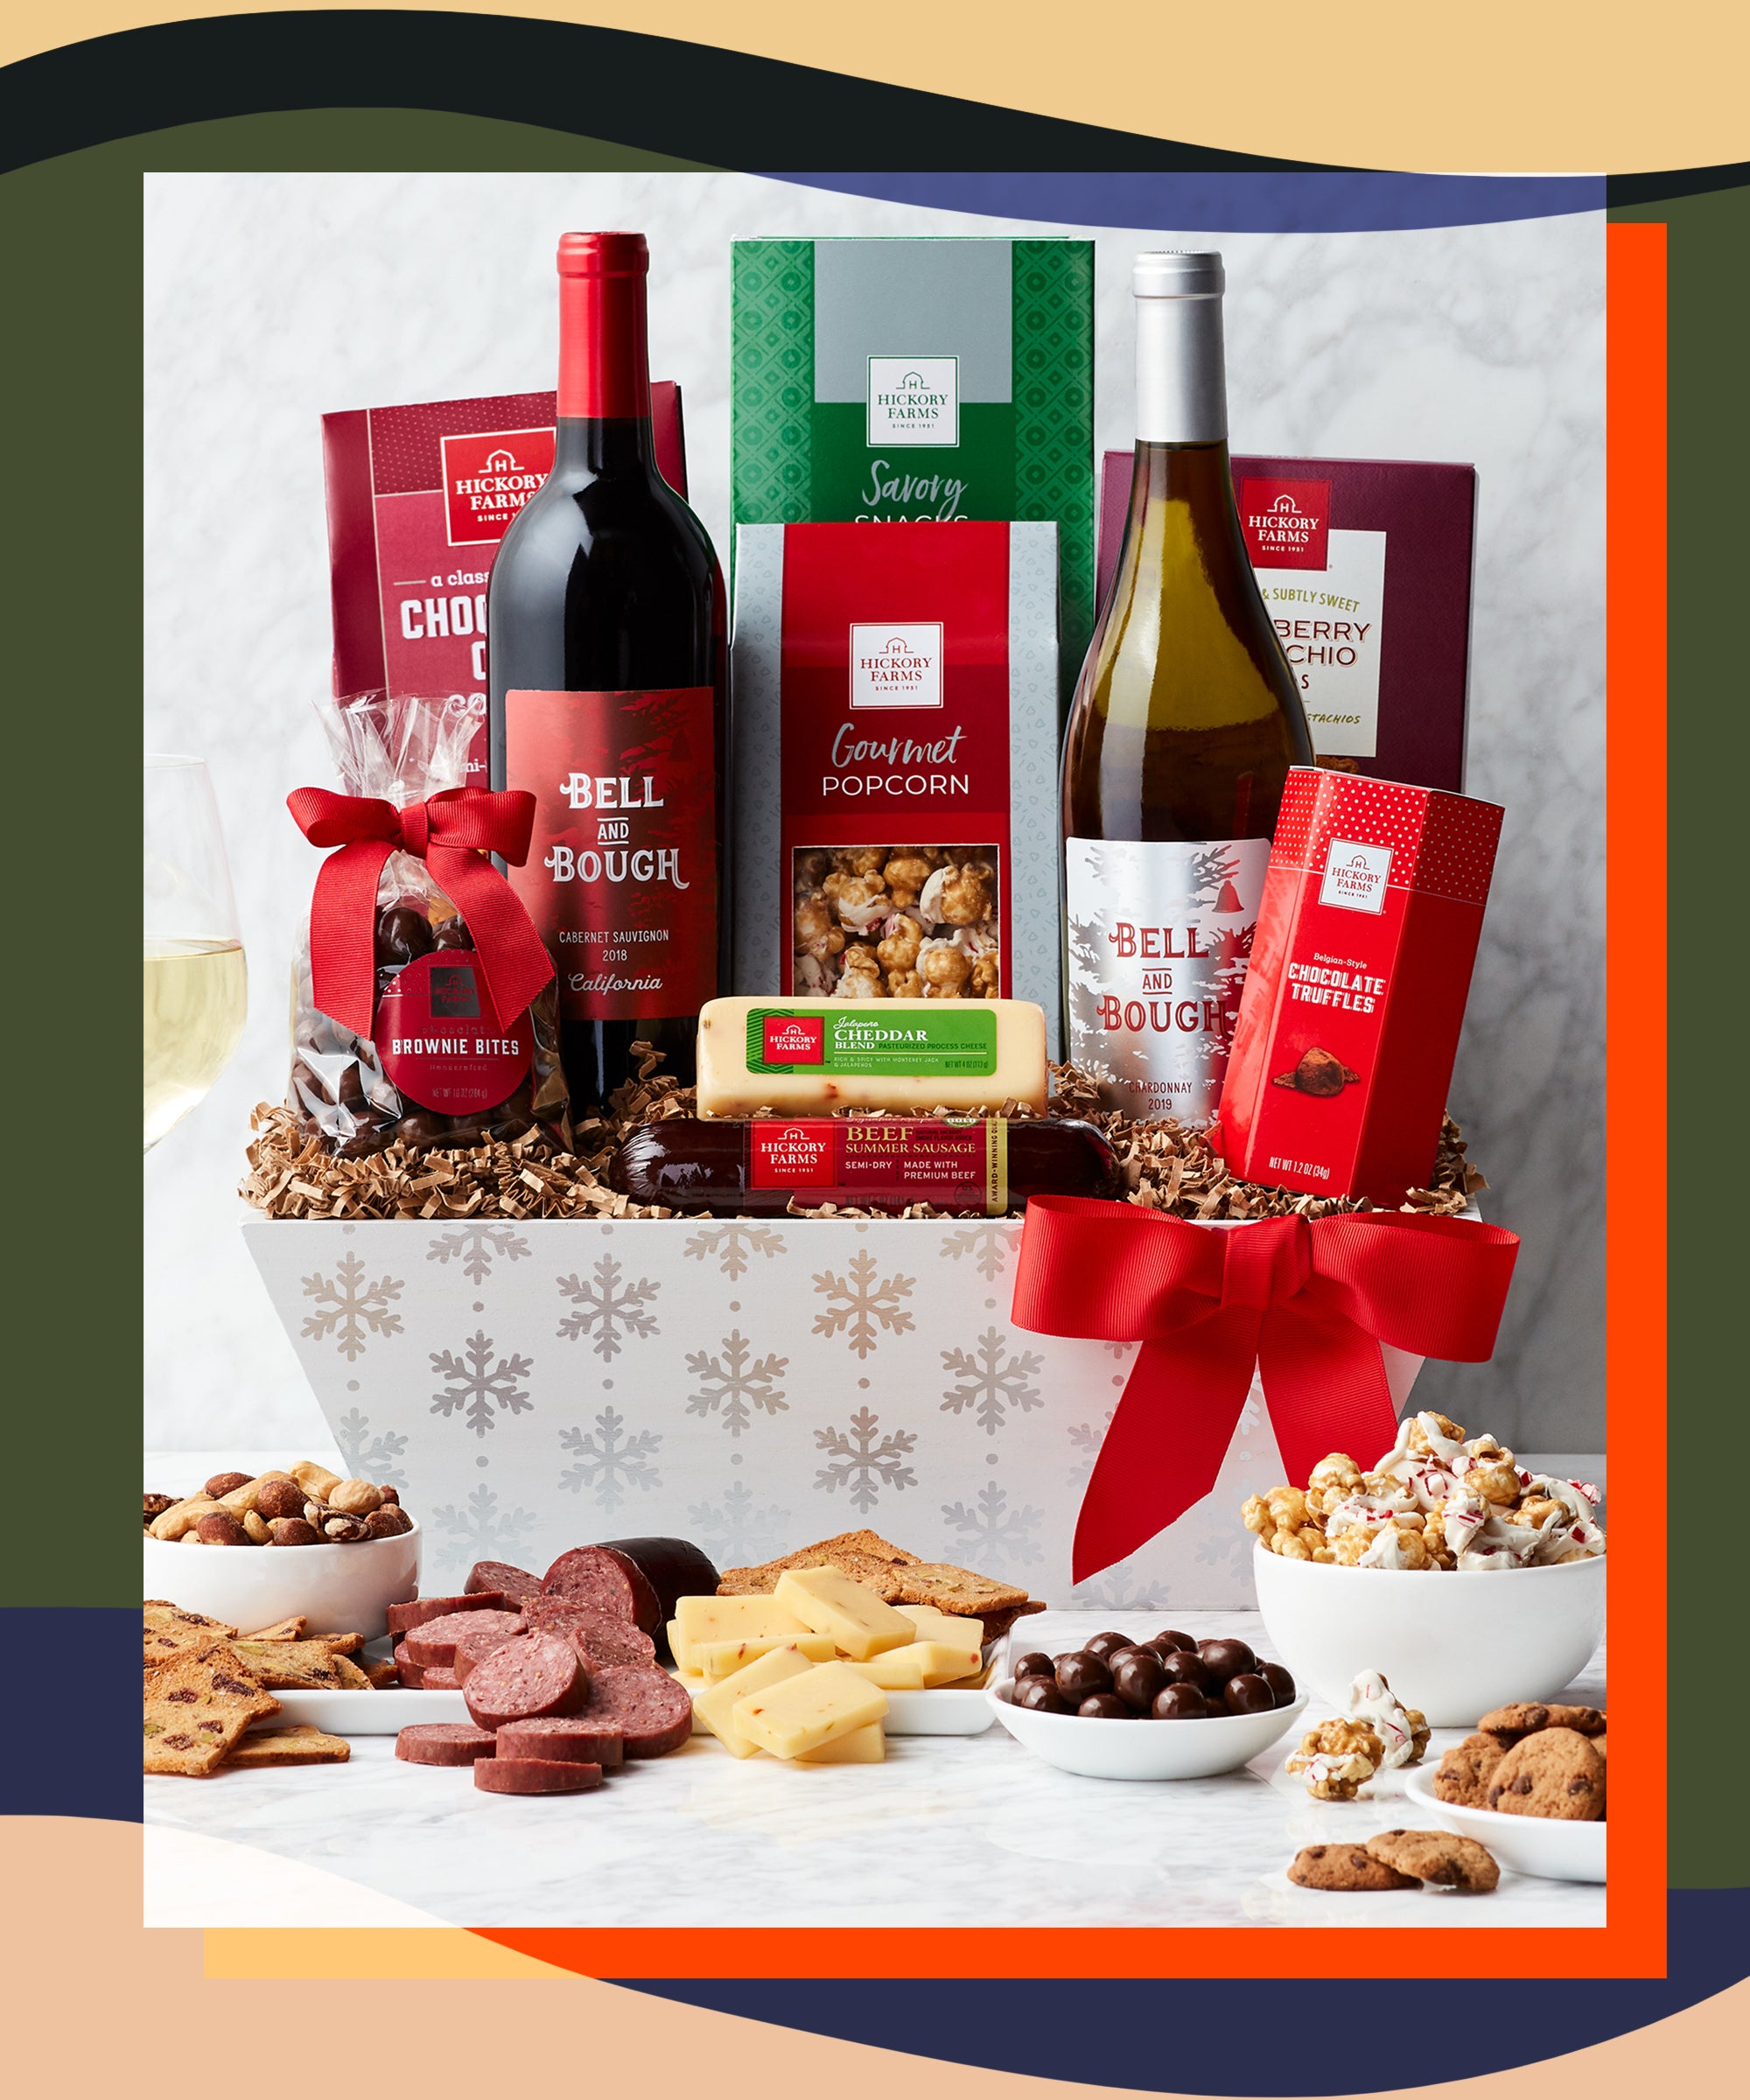 Gourmet Breakfast Gift Basket - Shop Gift World for the World's Finest  Gourmet Food Baskets, Themed Gift Box Collections and Specialty Gifts.